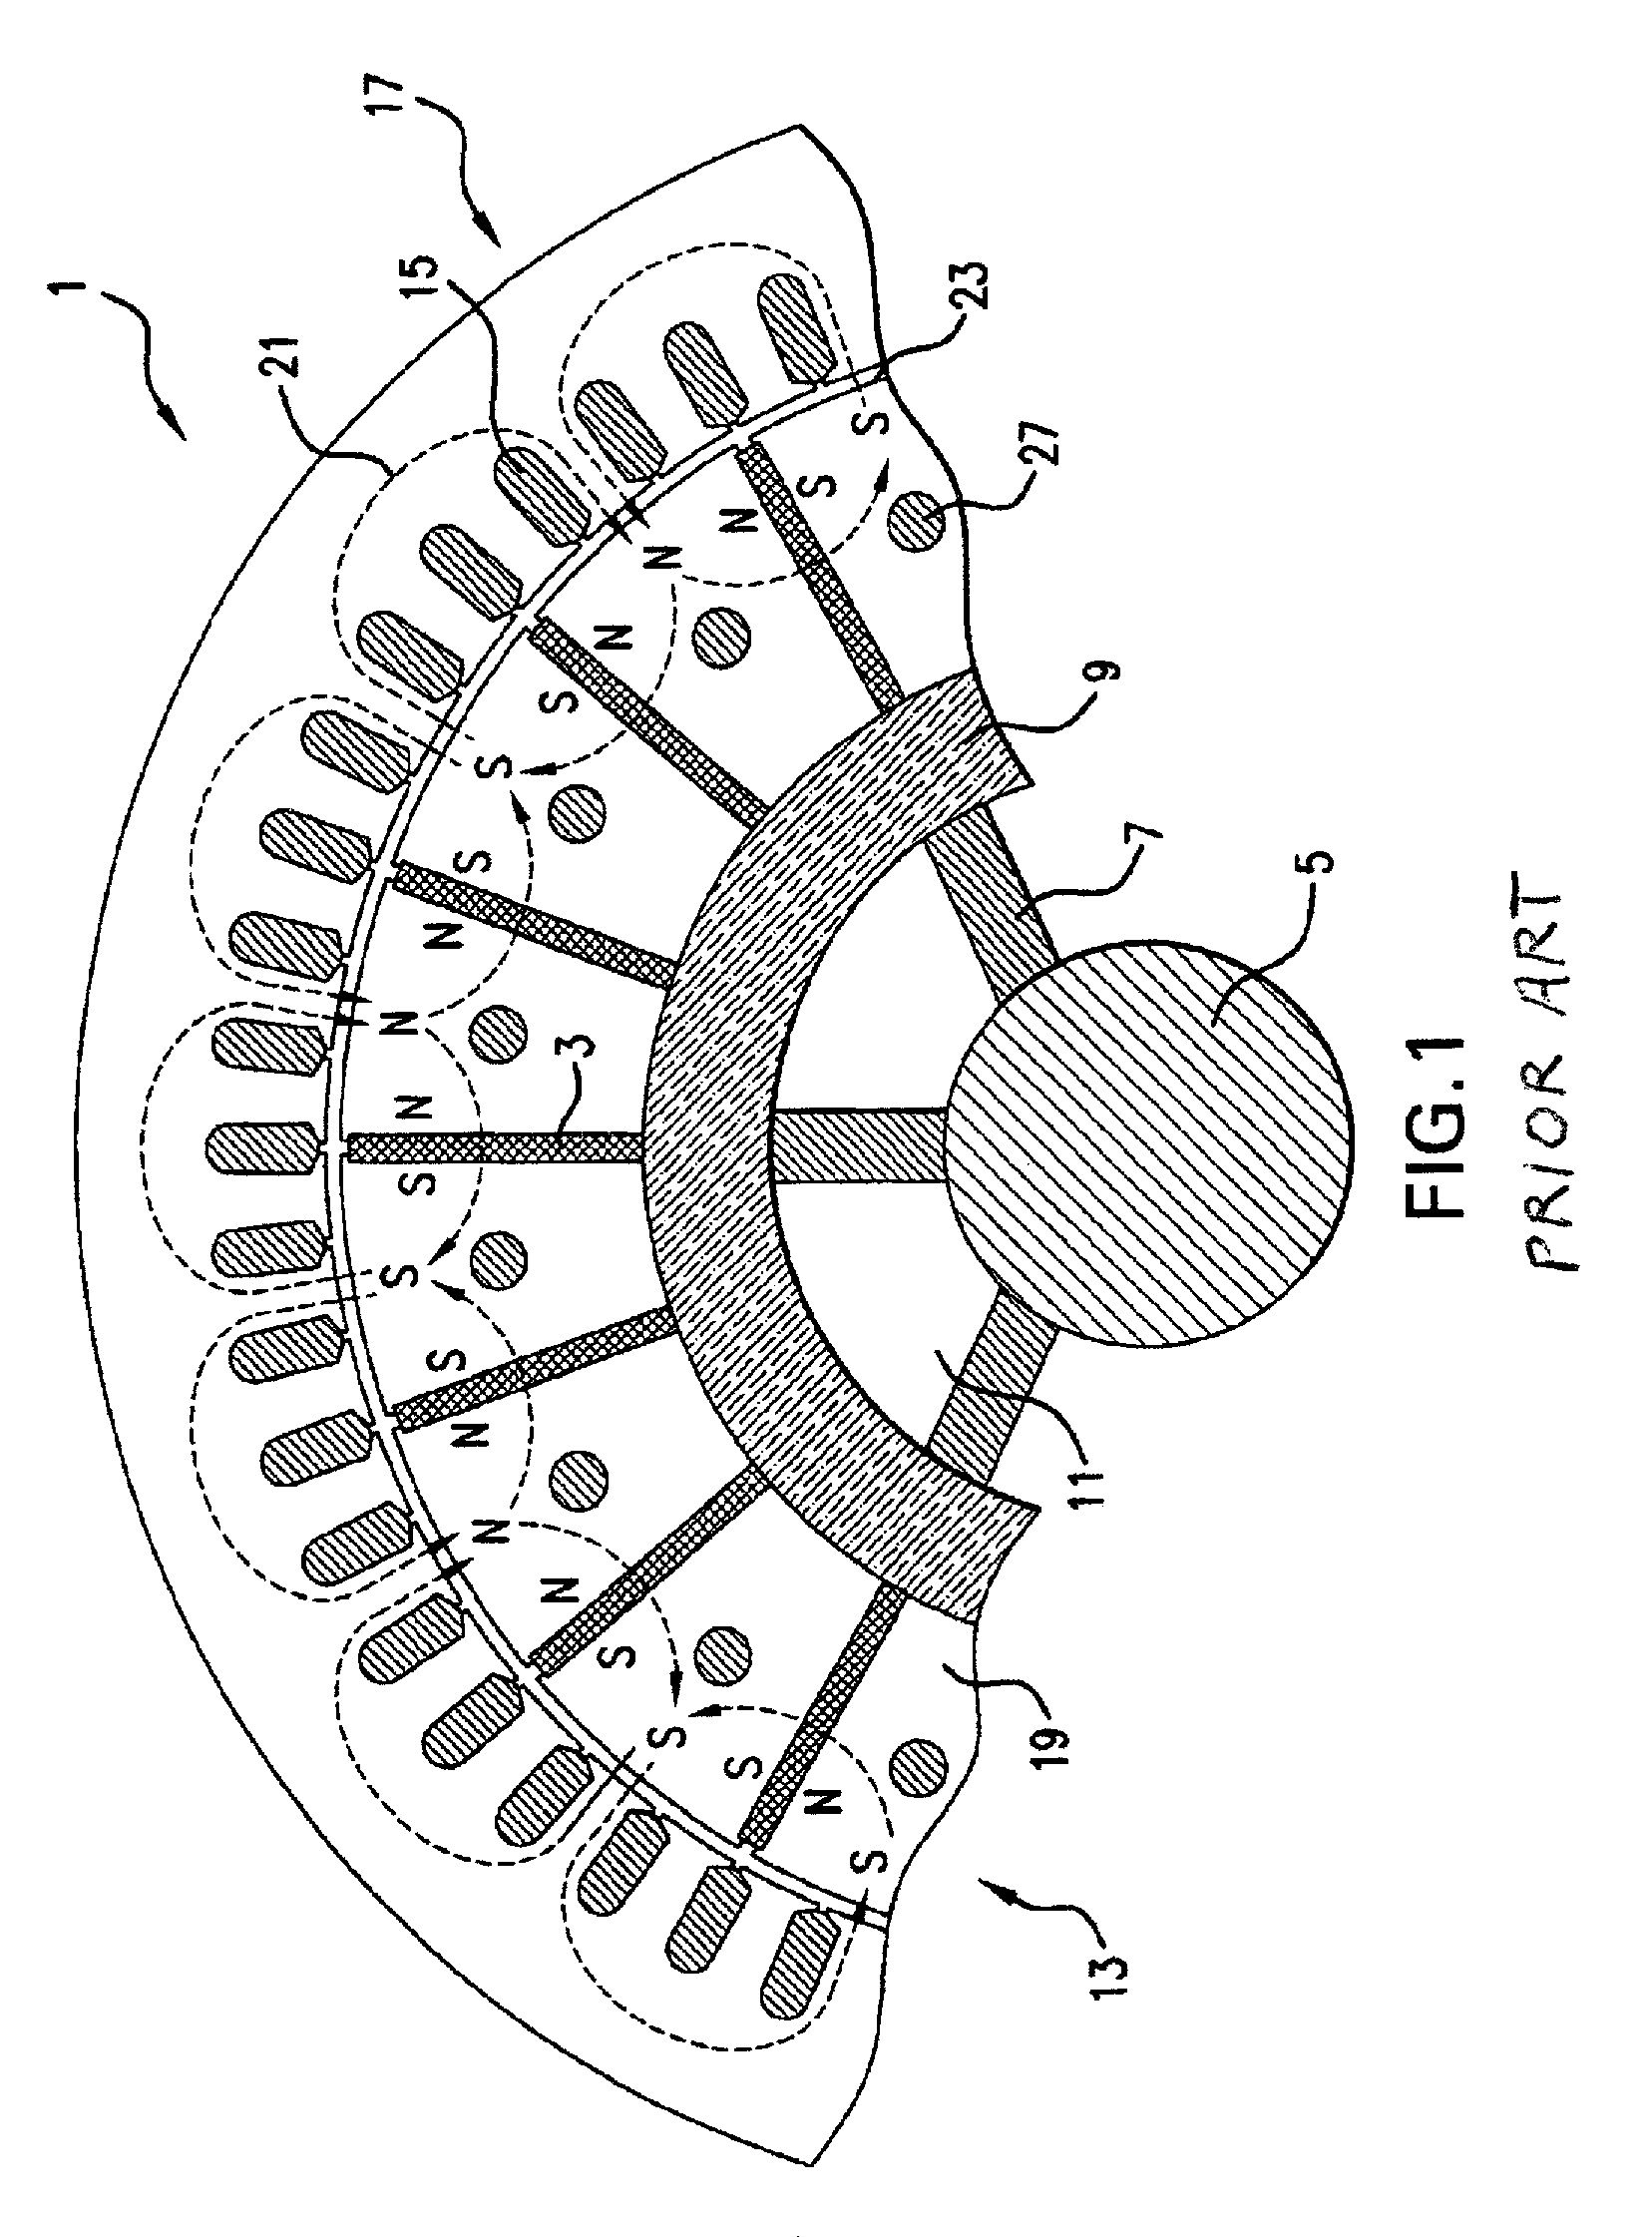 Clamp and lock permanent magnets within a rotating electrical machine using pitched focused flux magnets